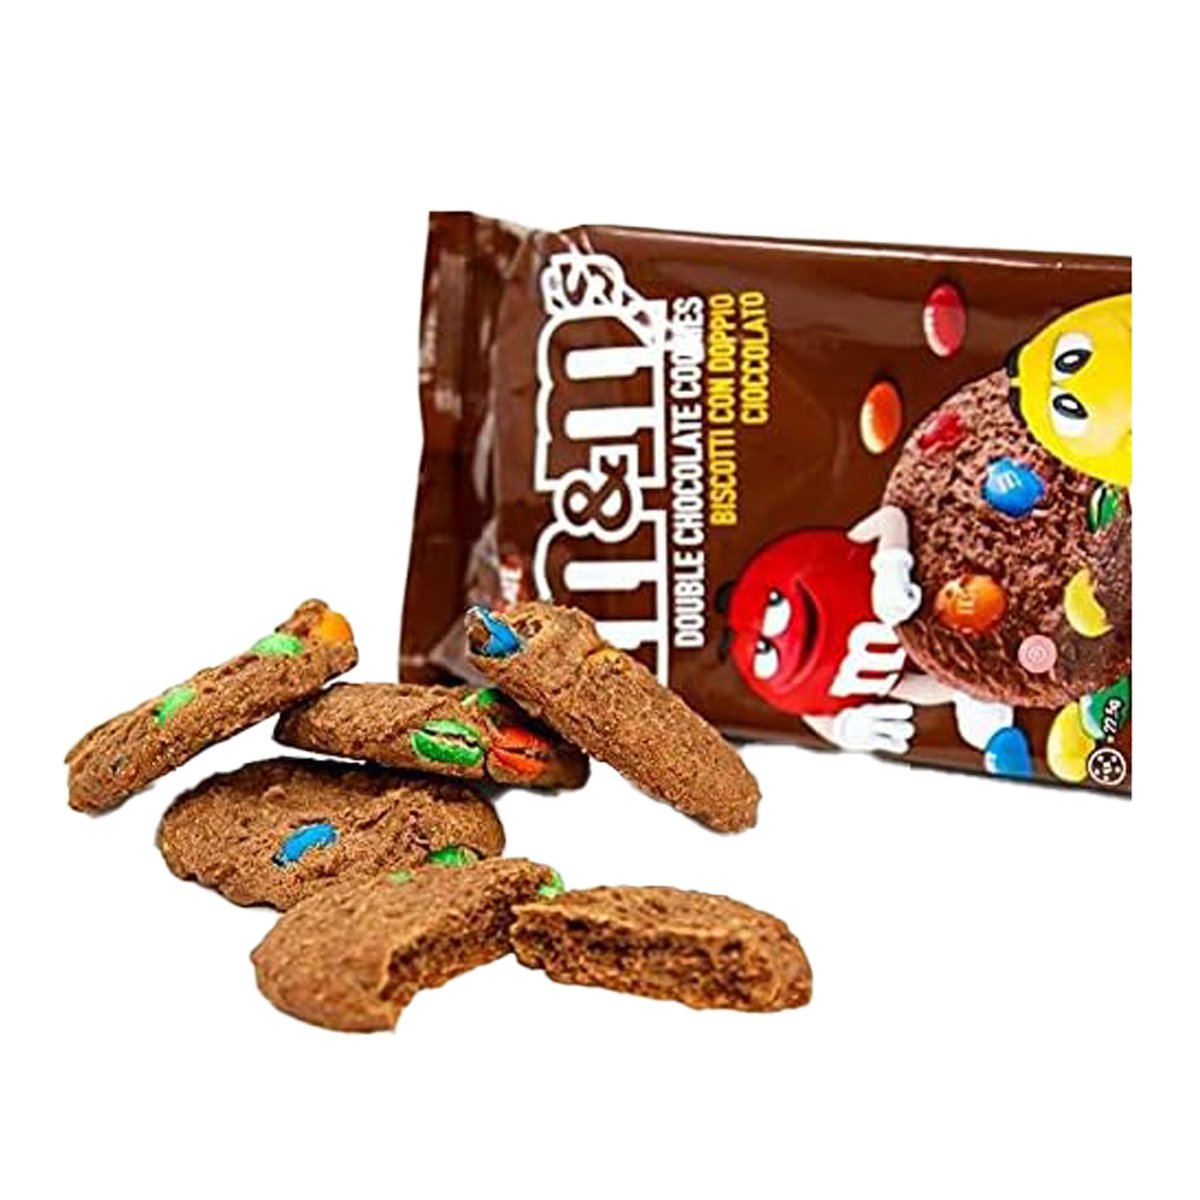 M&M's Double Chocolate Cookies 180 g